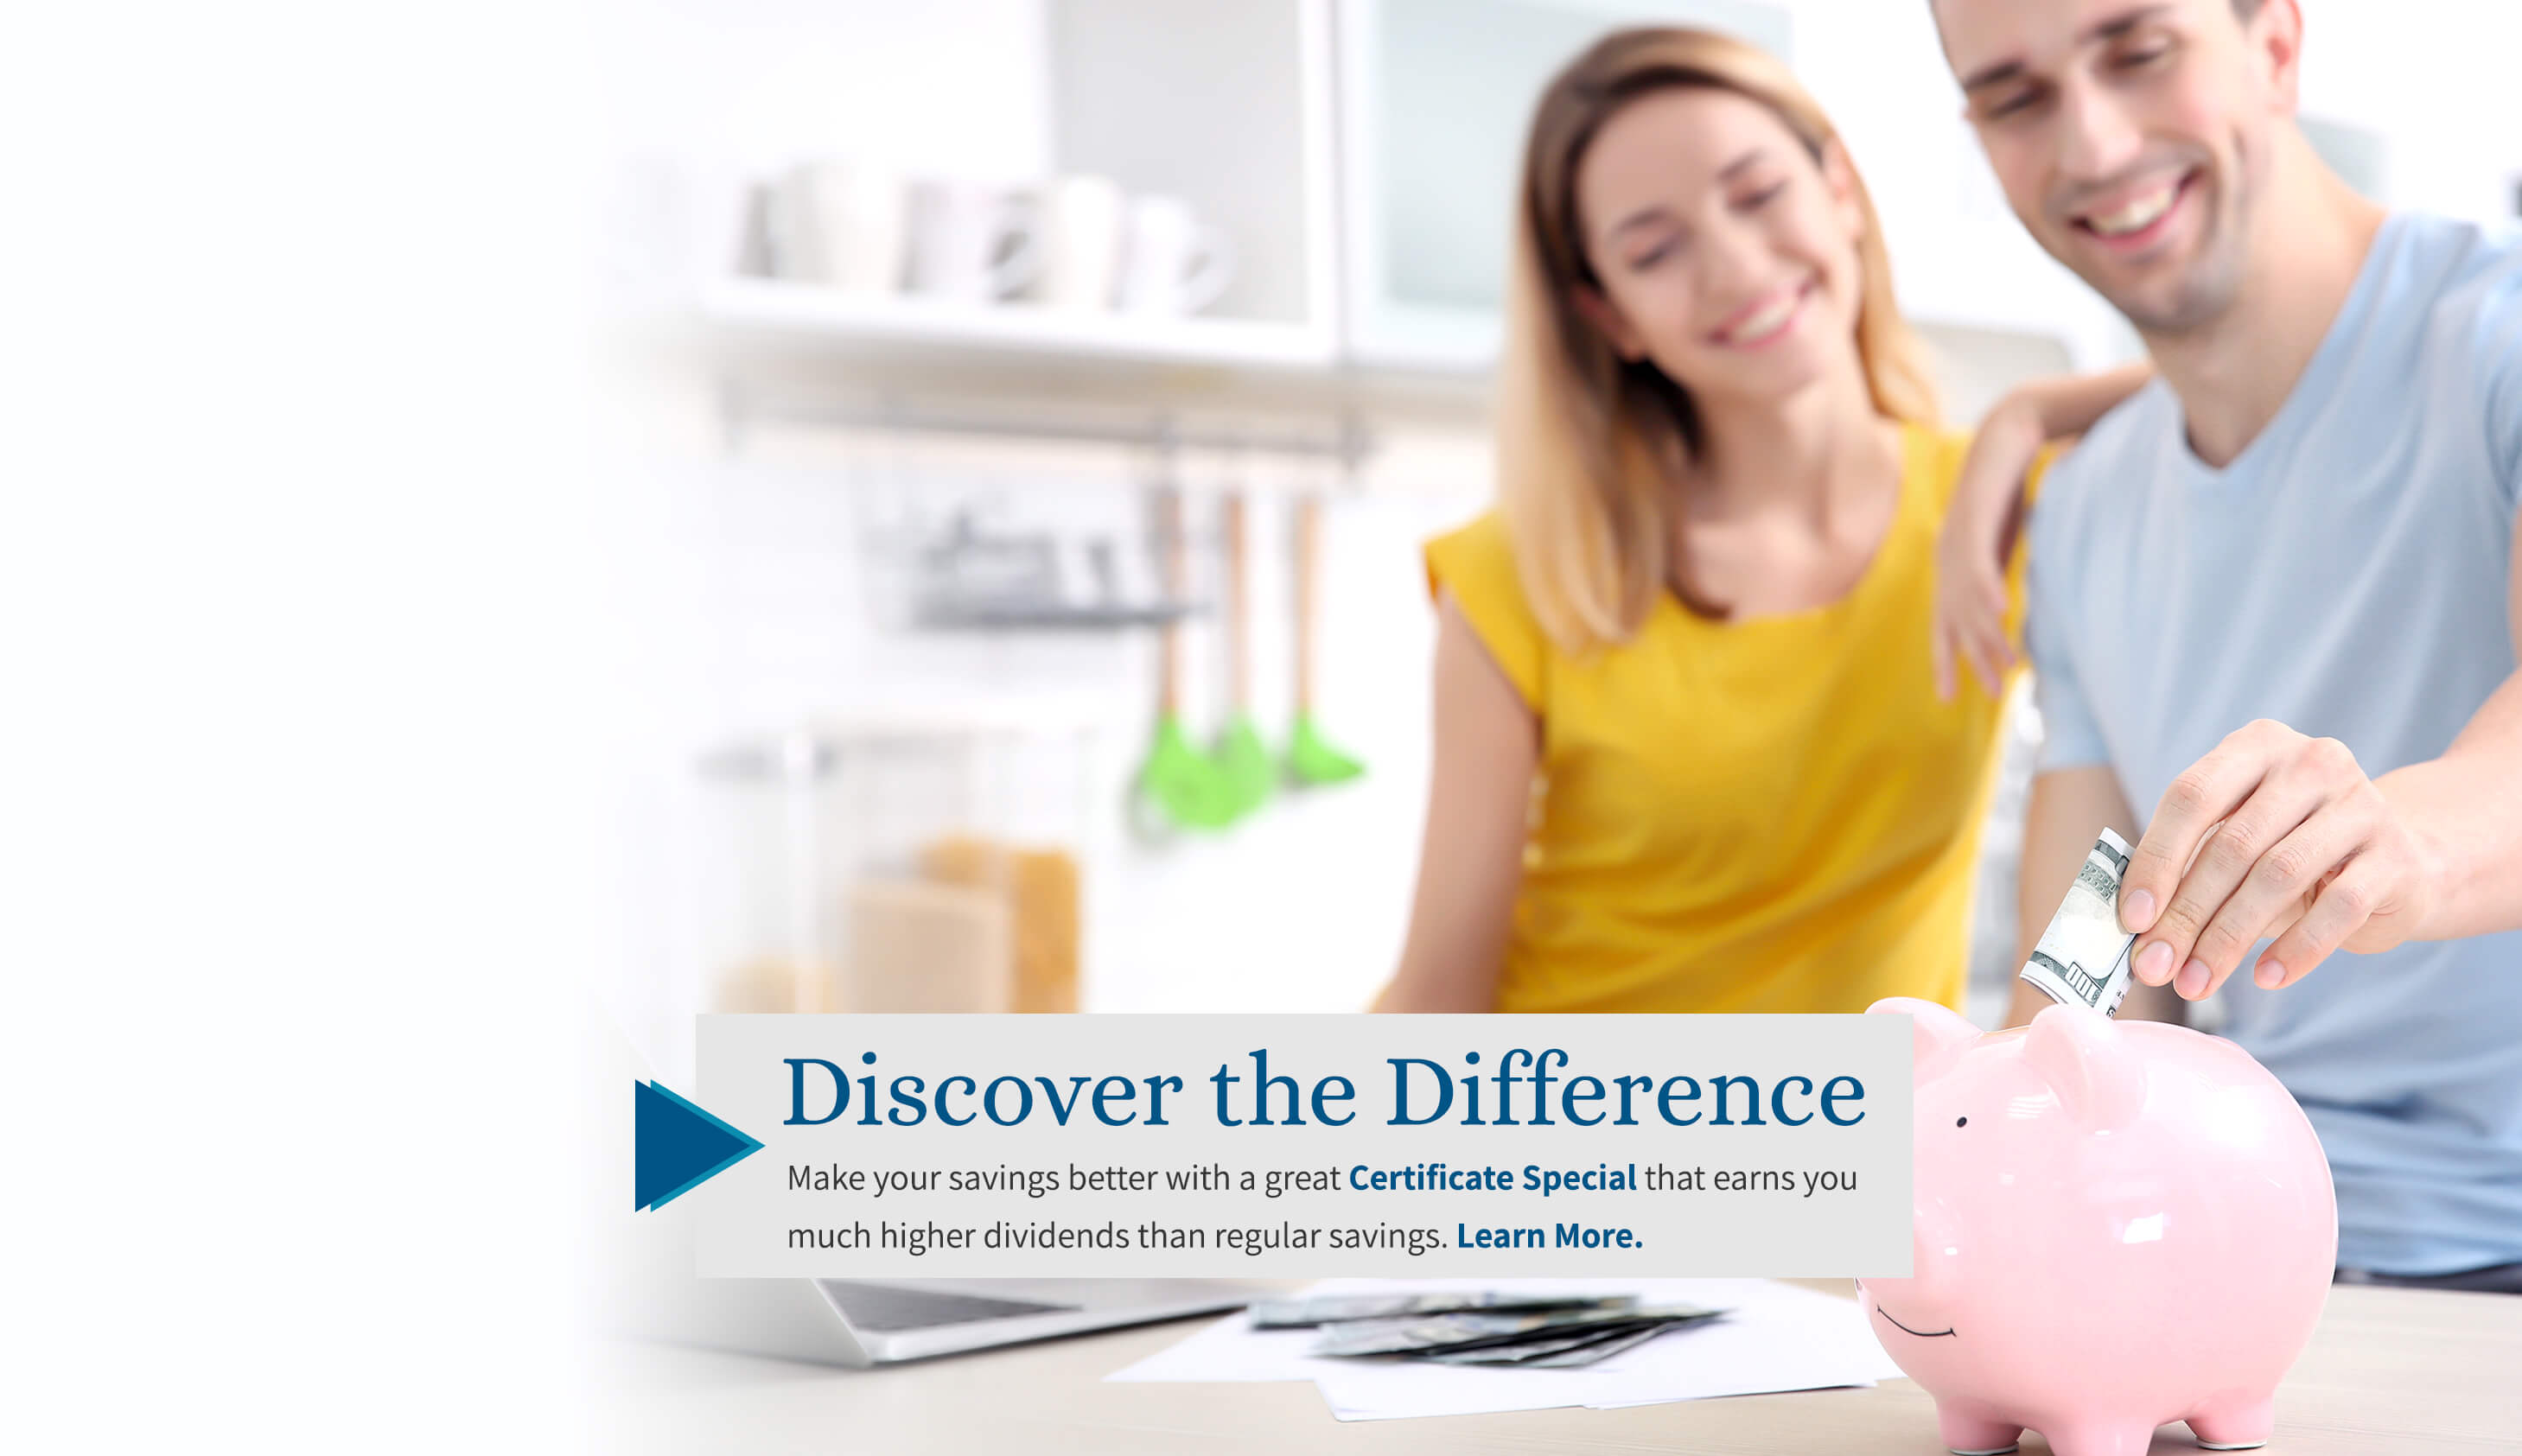 Discover the difference Make your savings better with a great certificate special that earns you much higher dividends than regular savings. Learn More.